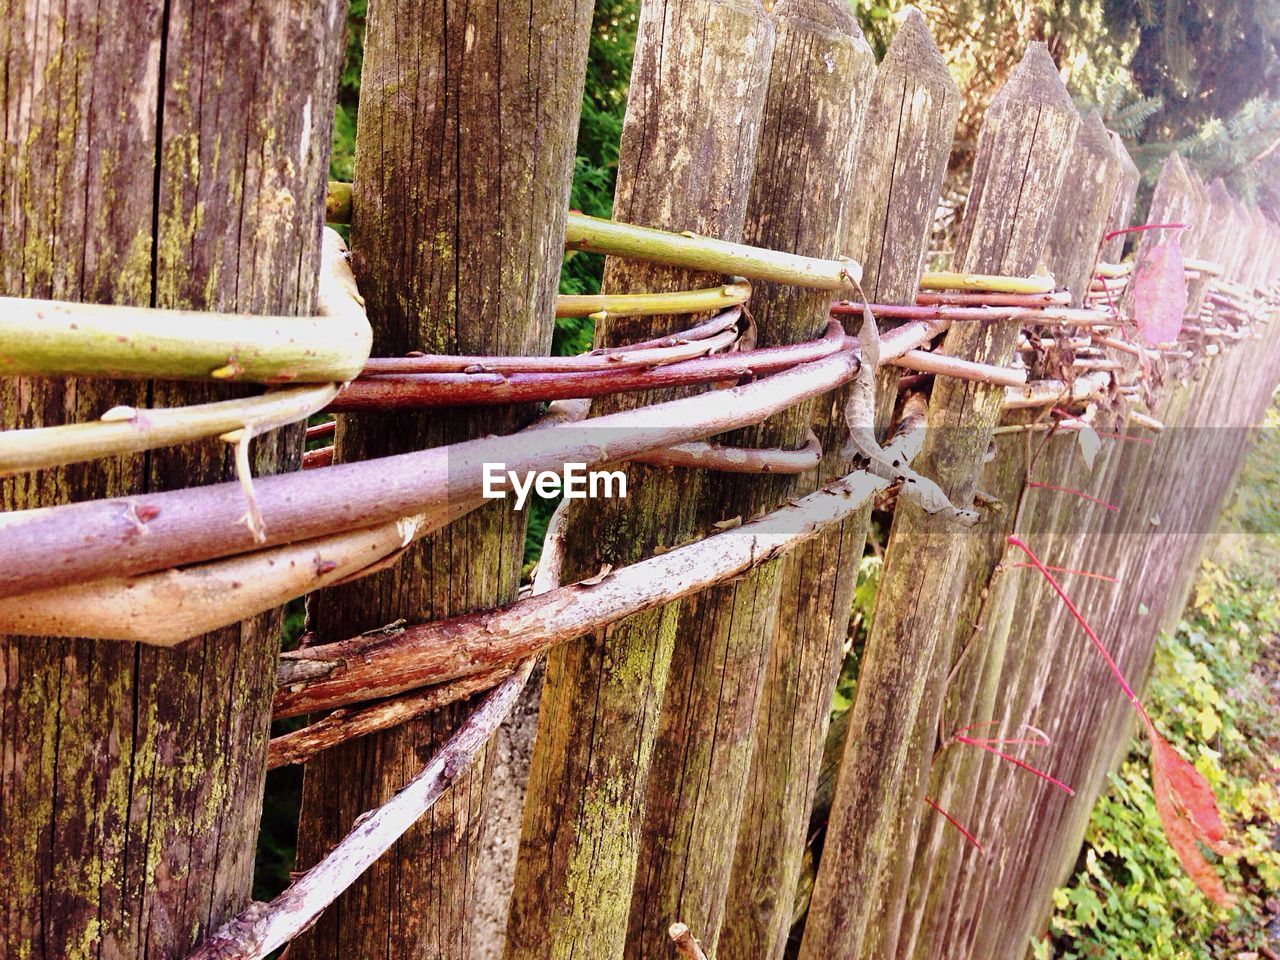 CLOSE-UP OF WOODEN FENCE ON TREE ROOTS